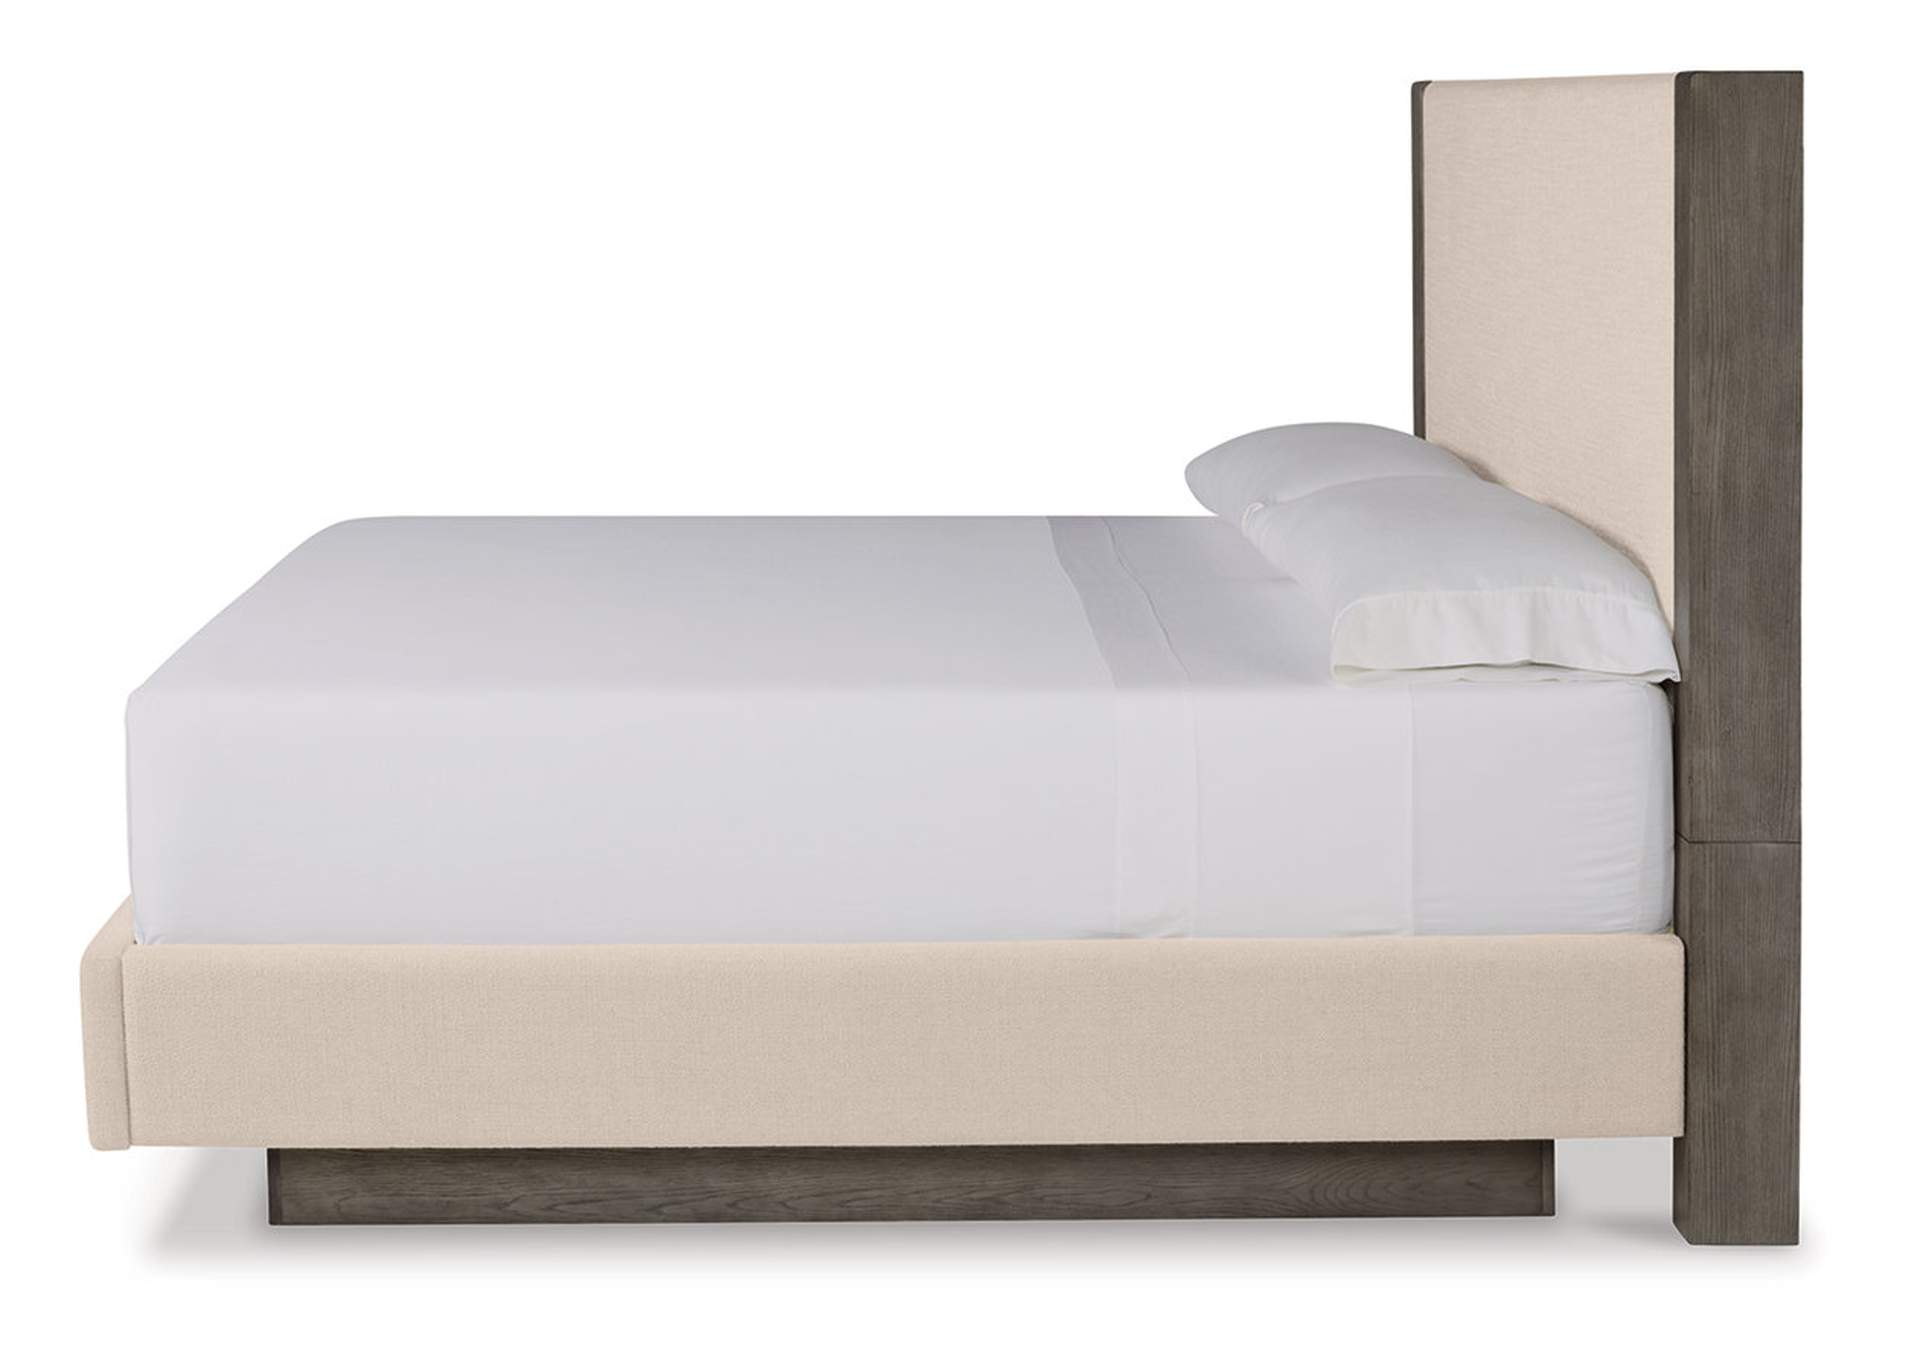 Anibecca King Upholstered Bed,Benchcraft